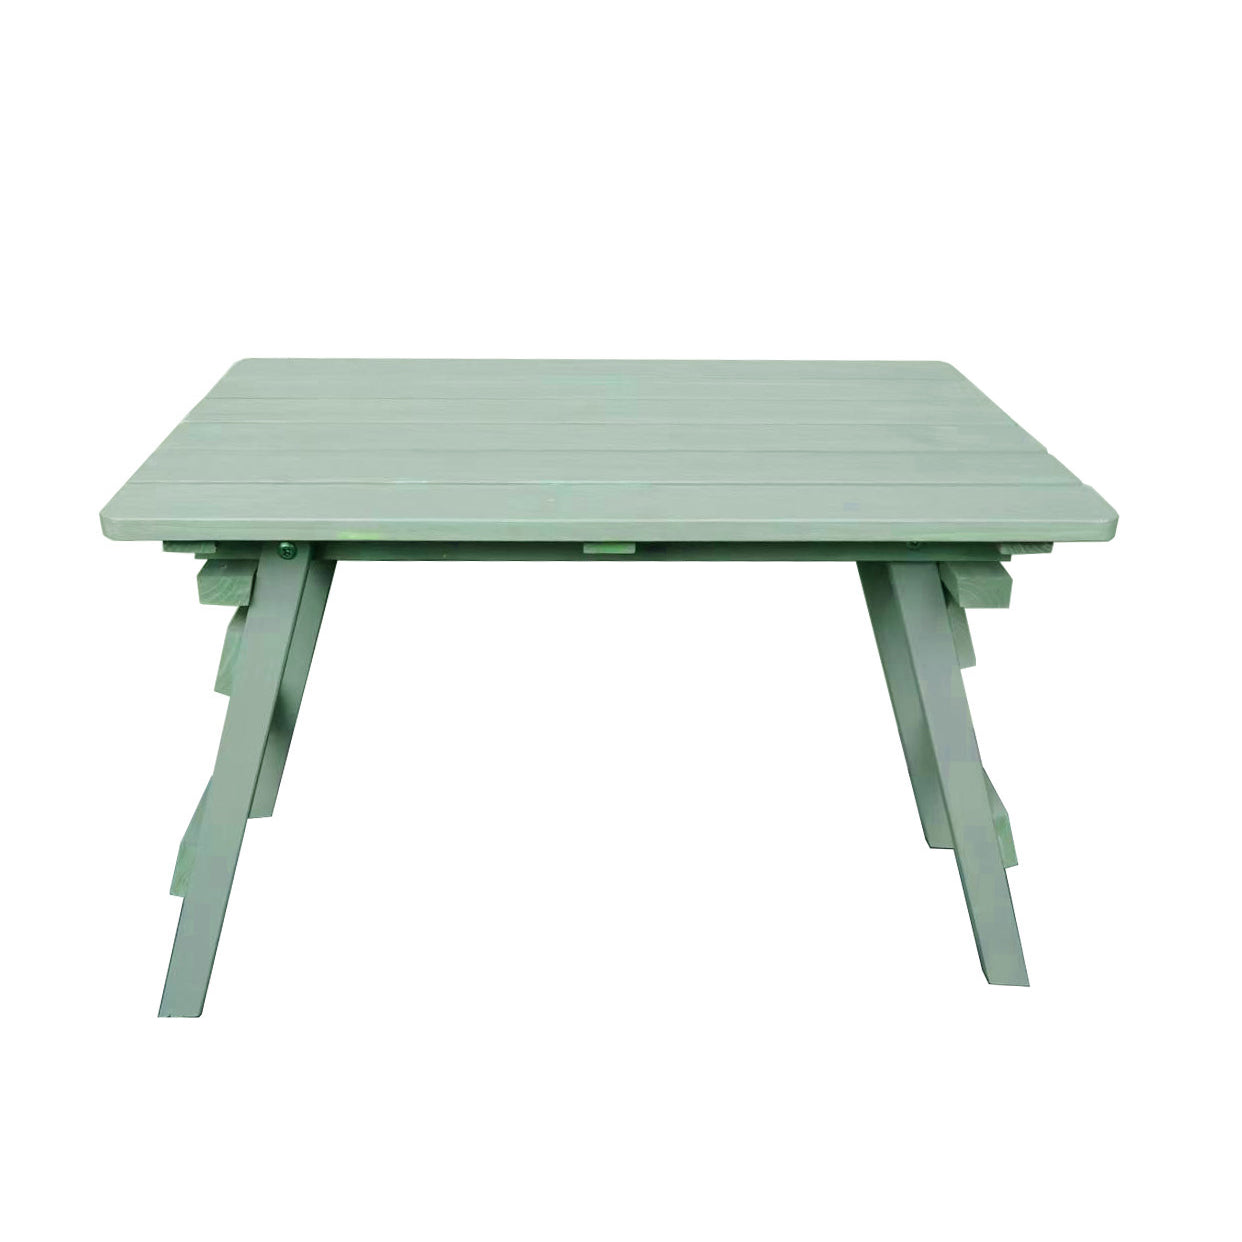 Solid Wood Dining Table Rectangle Contemporary Camping Table